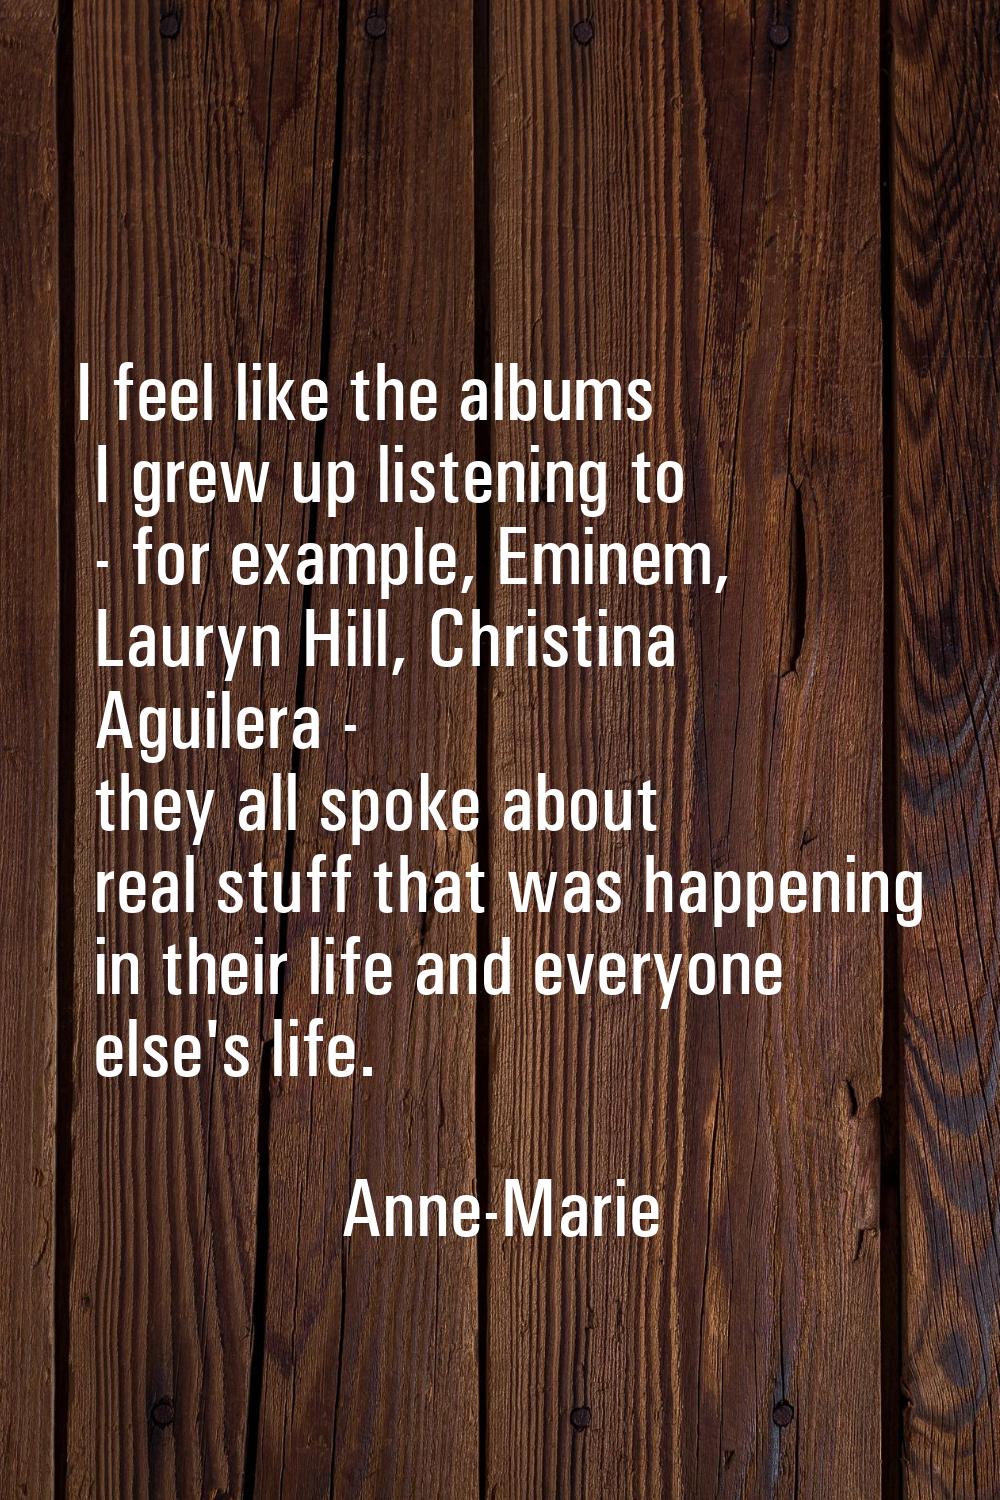 I feel like the albums I grew up listening to - for example, Eminem, Lauryn Hill, Christina Aguiler